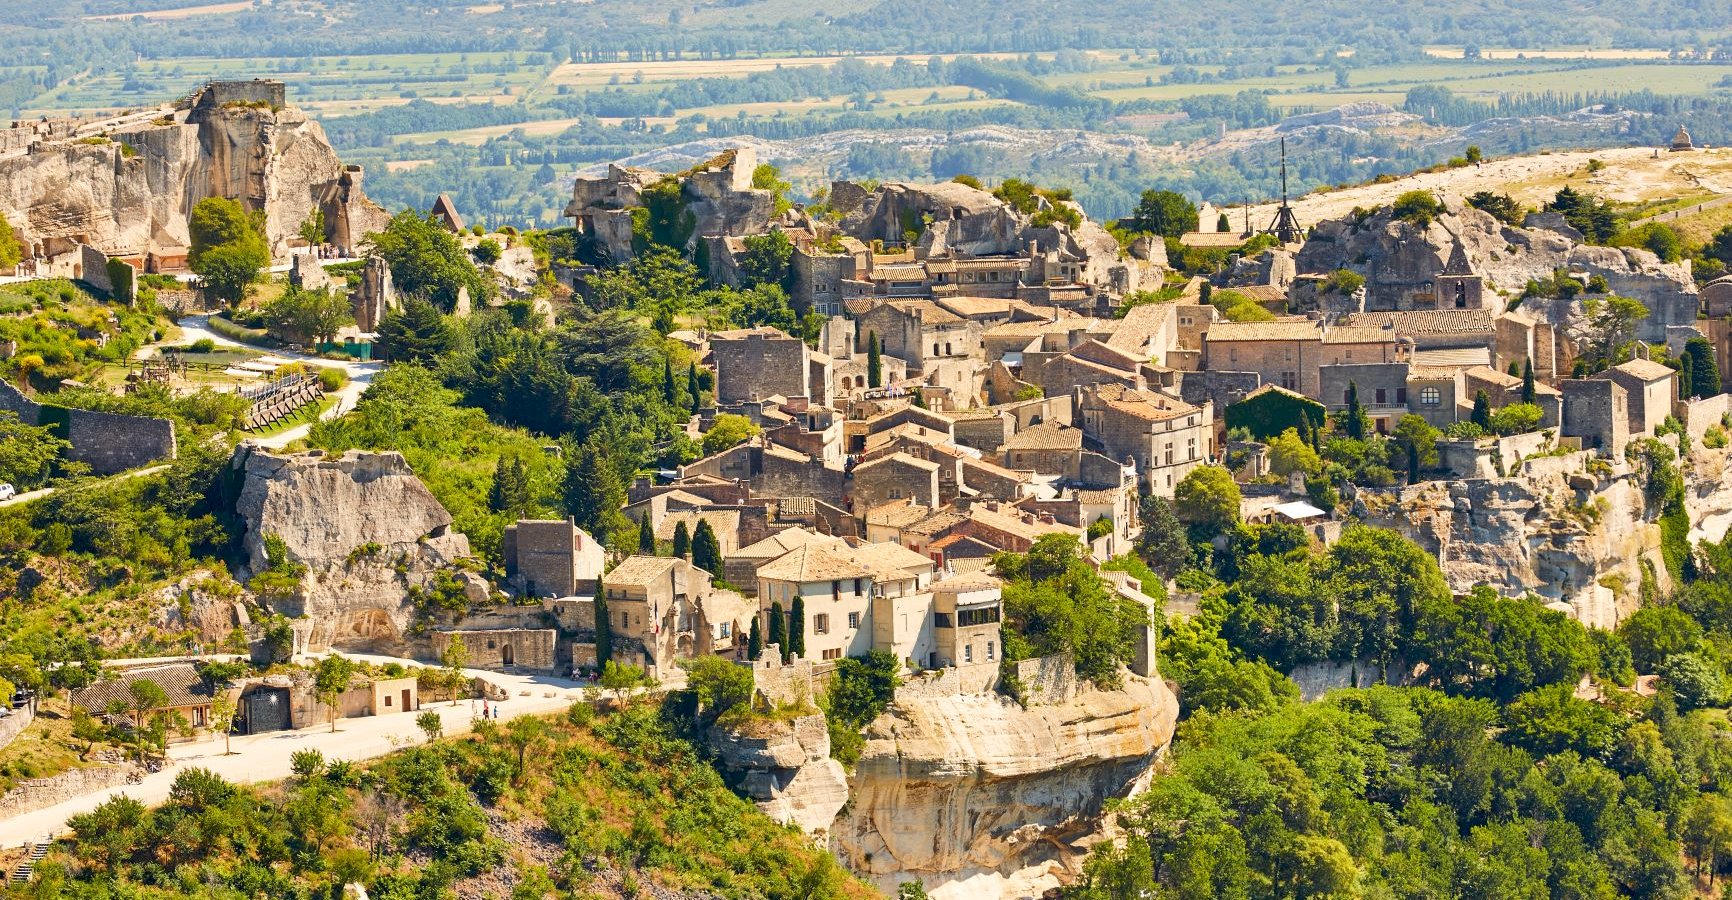 Ophorus Tours - 5 Days Provence Shared Travel Package - 3* Hotel Option